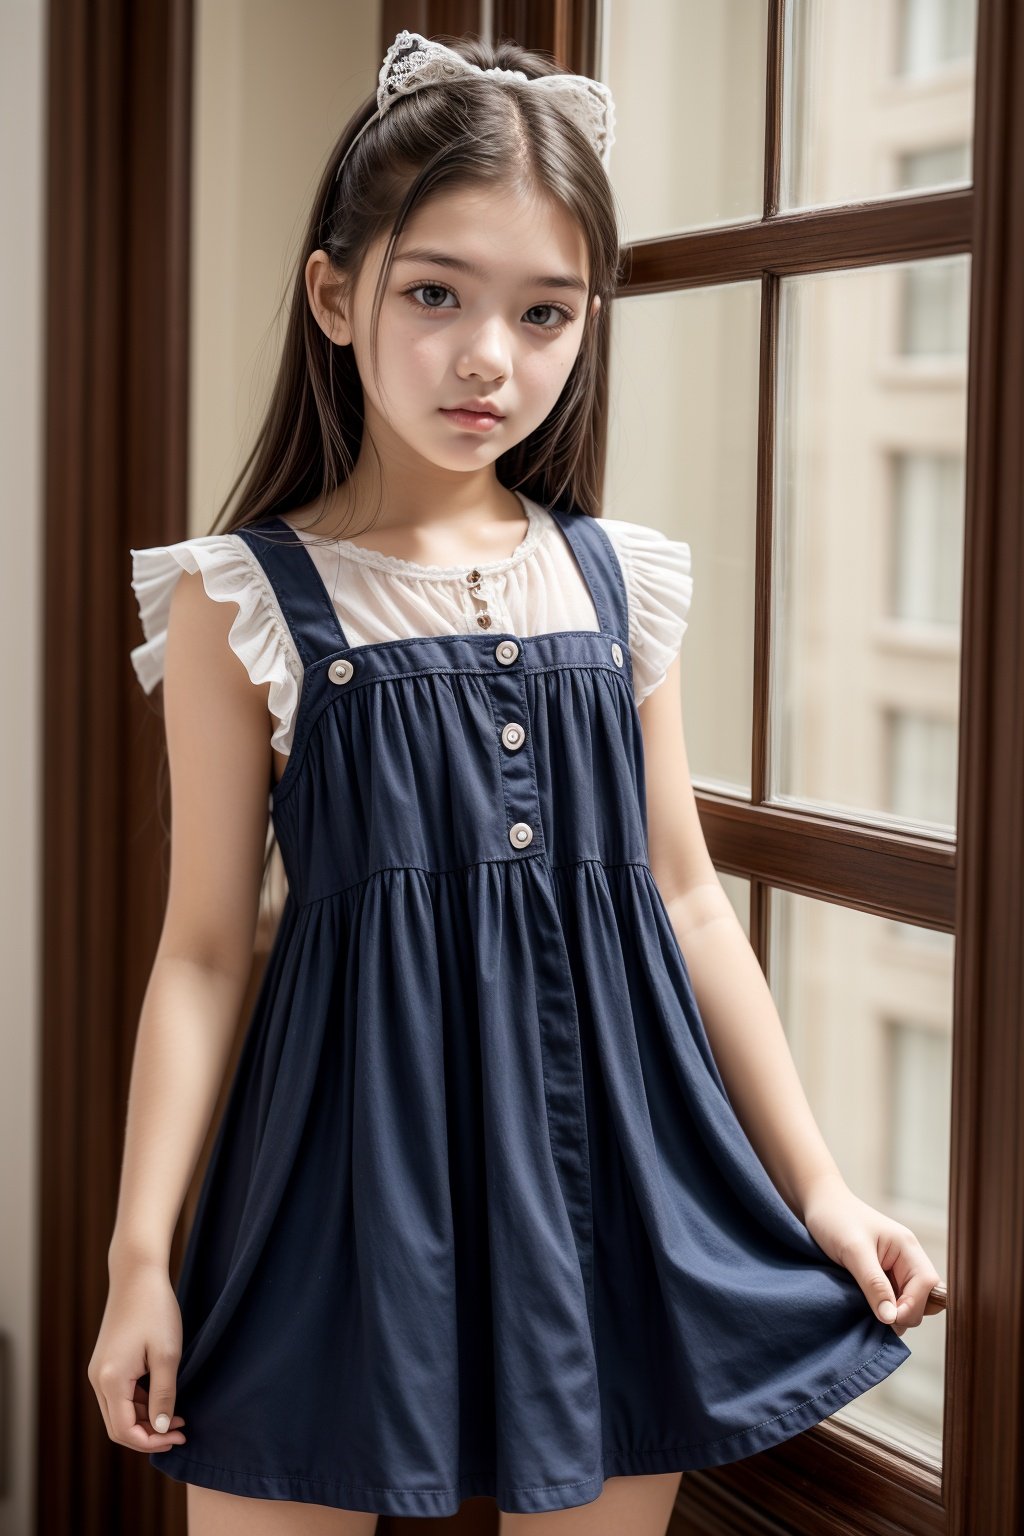 A 16 years old girl, baby dress, hand holding toy